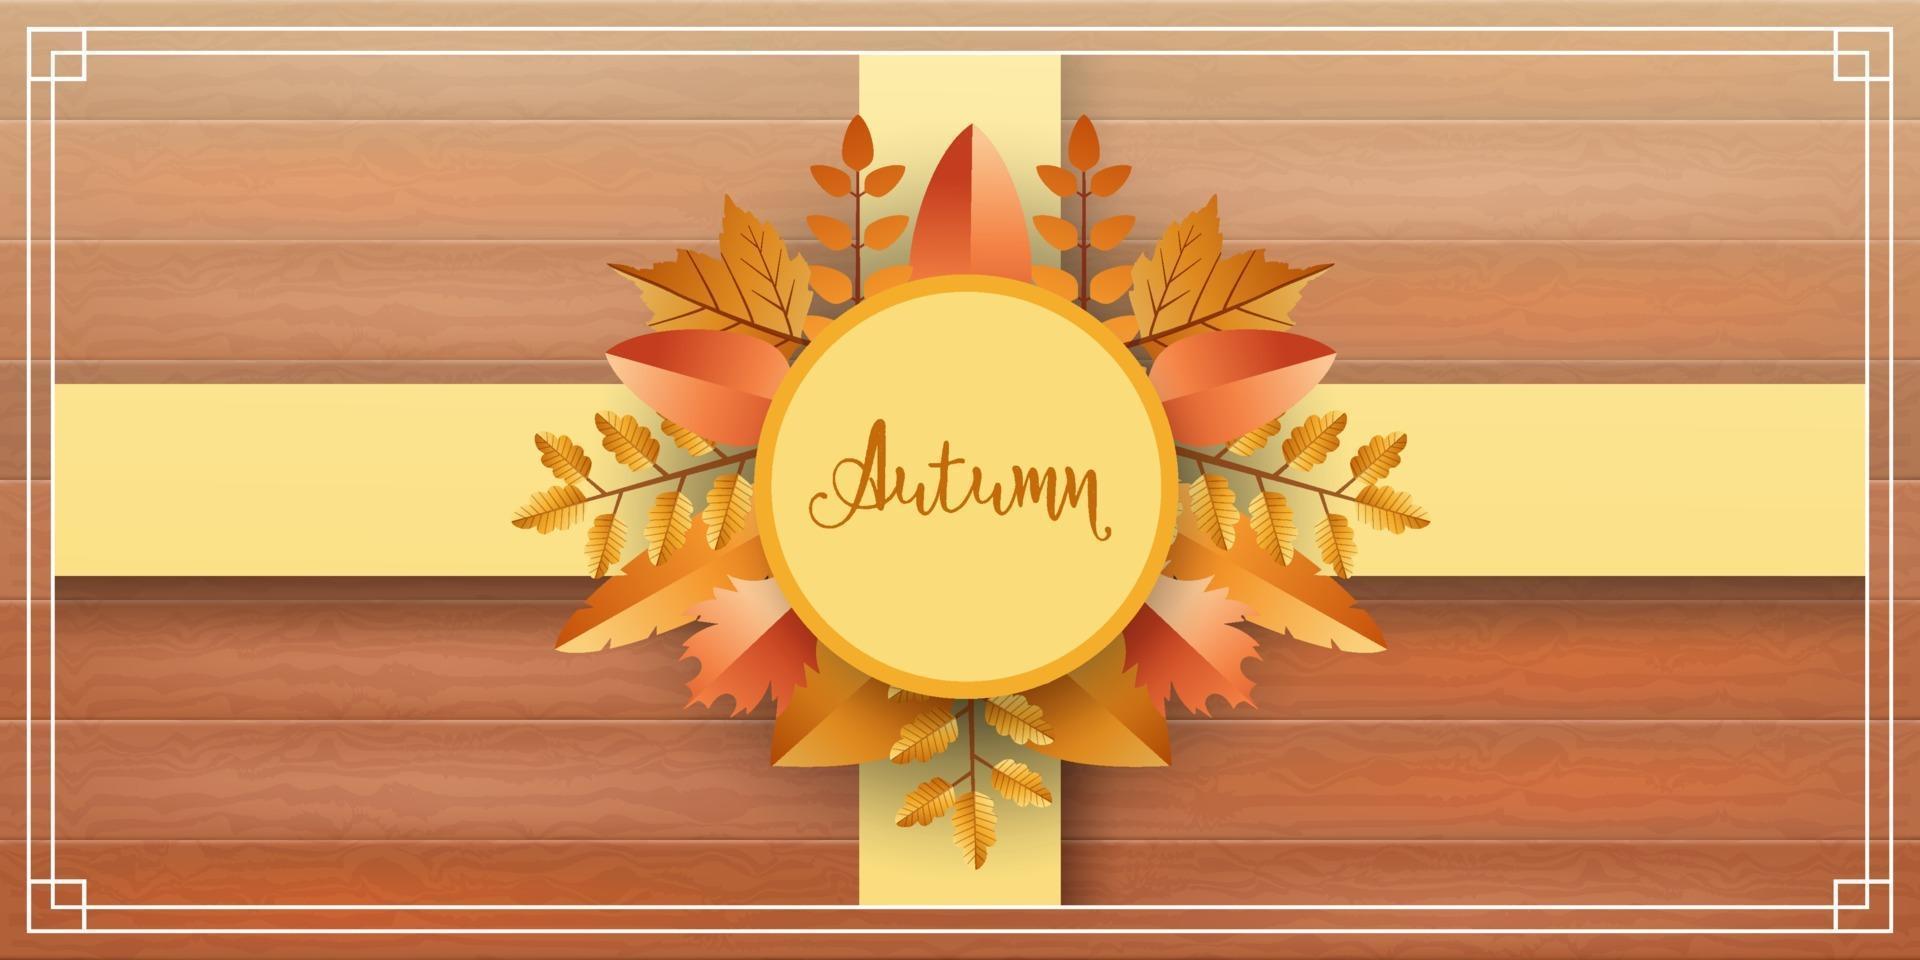 Wooden background with autumn leaves vector